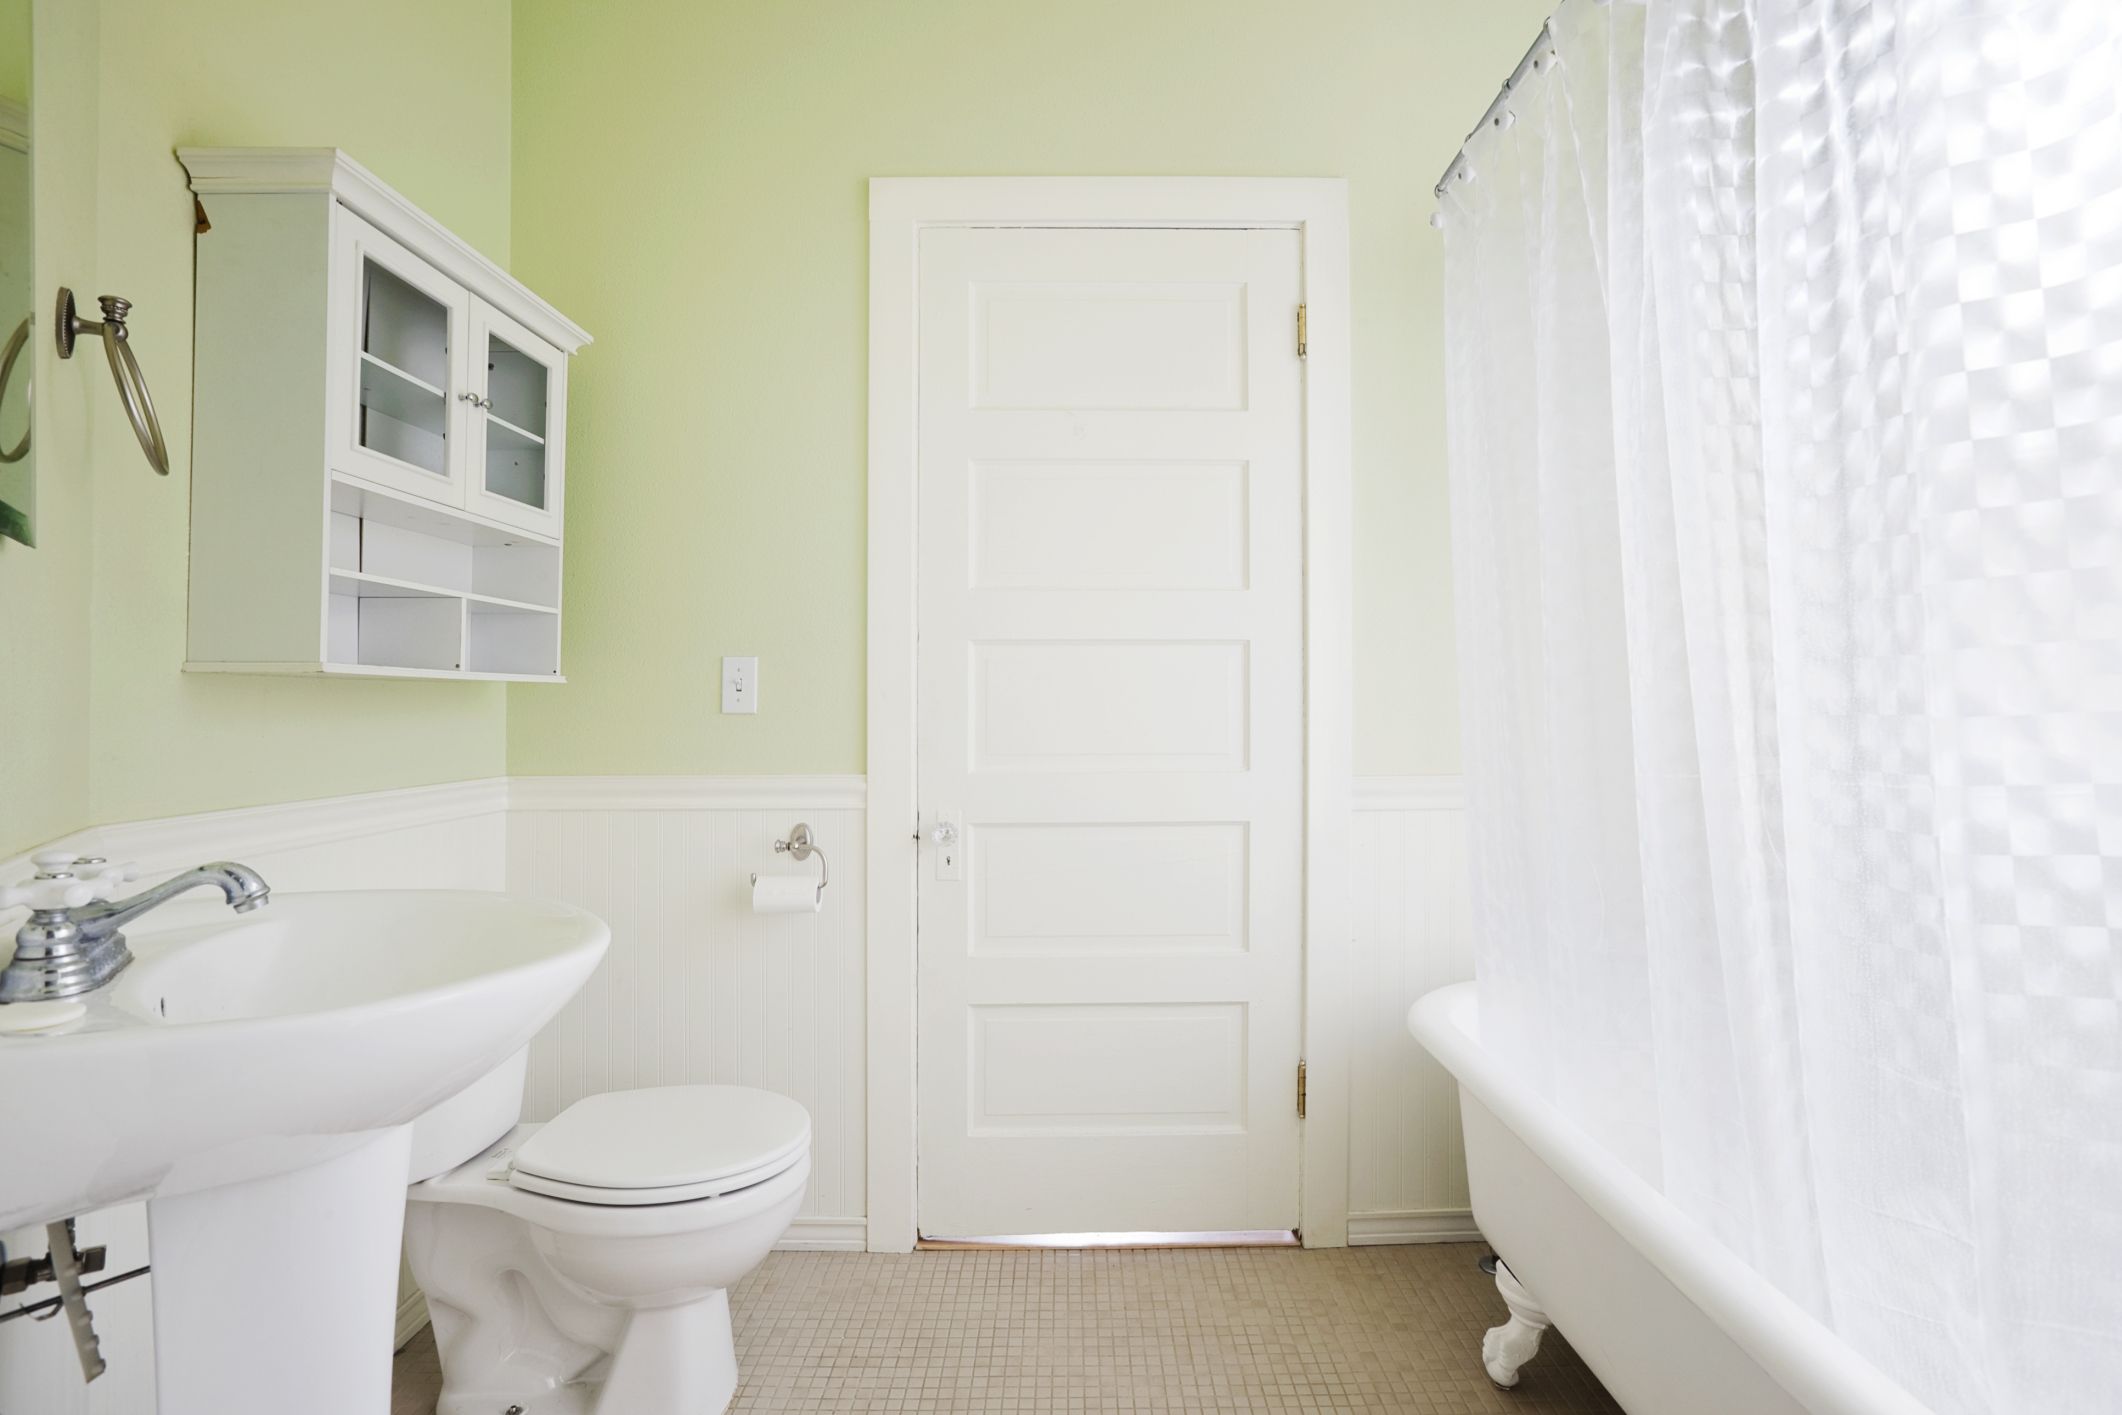 How To Speed Clean Your Bathroom Bathroom Cleaning Tips